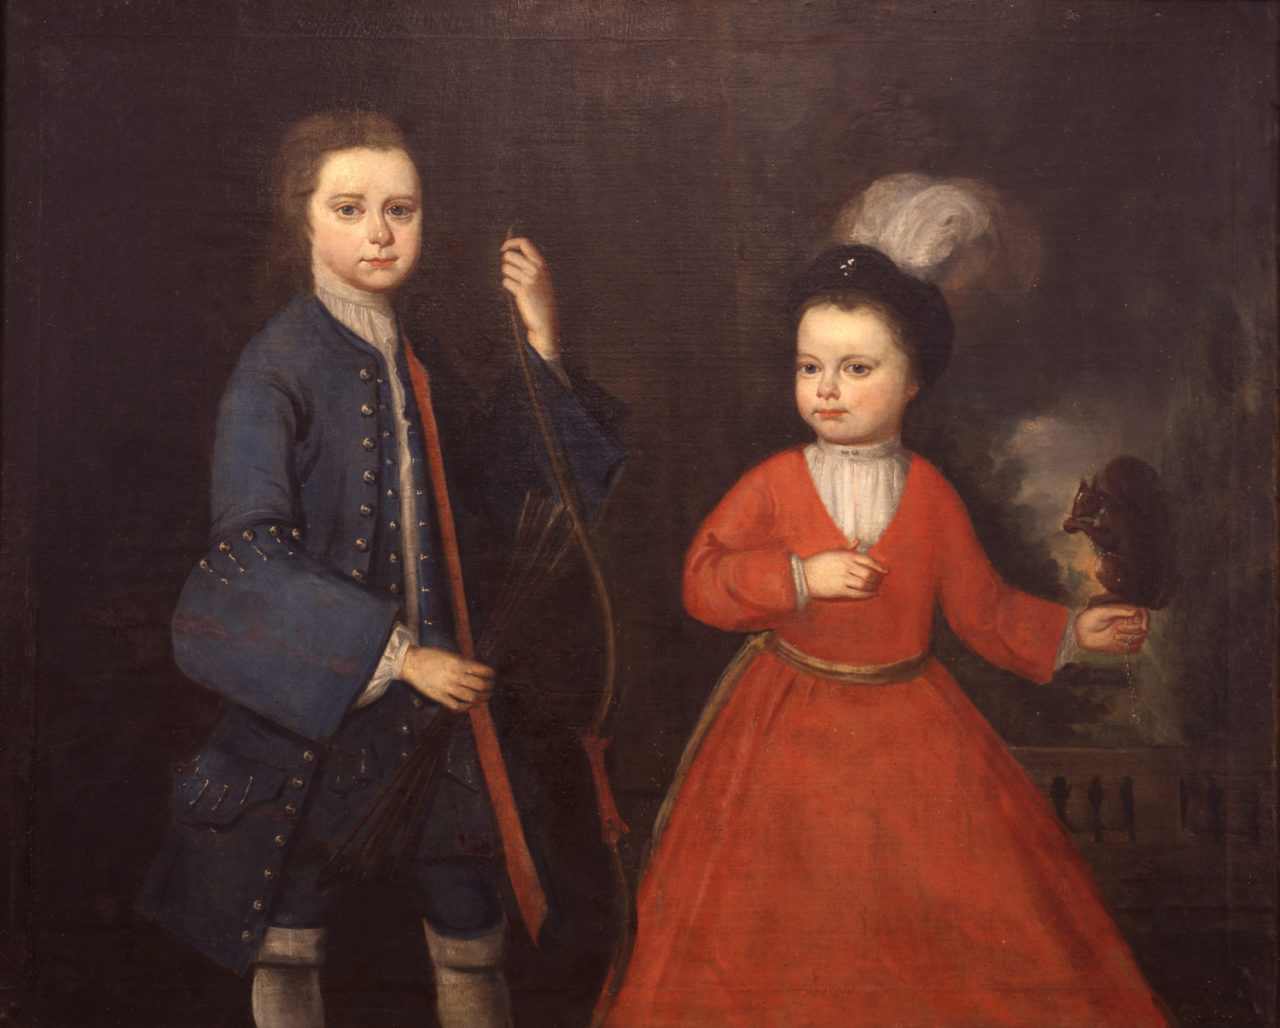 Benjamin Grymes (ca. 1725-1776) and Ludwell Grymes (ca. 1733-1795)